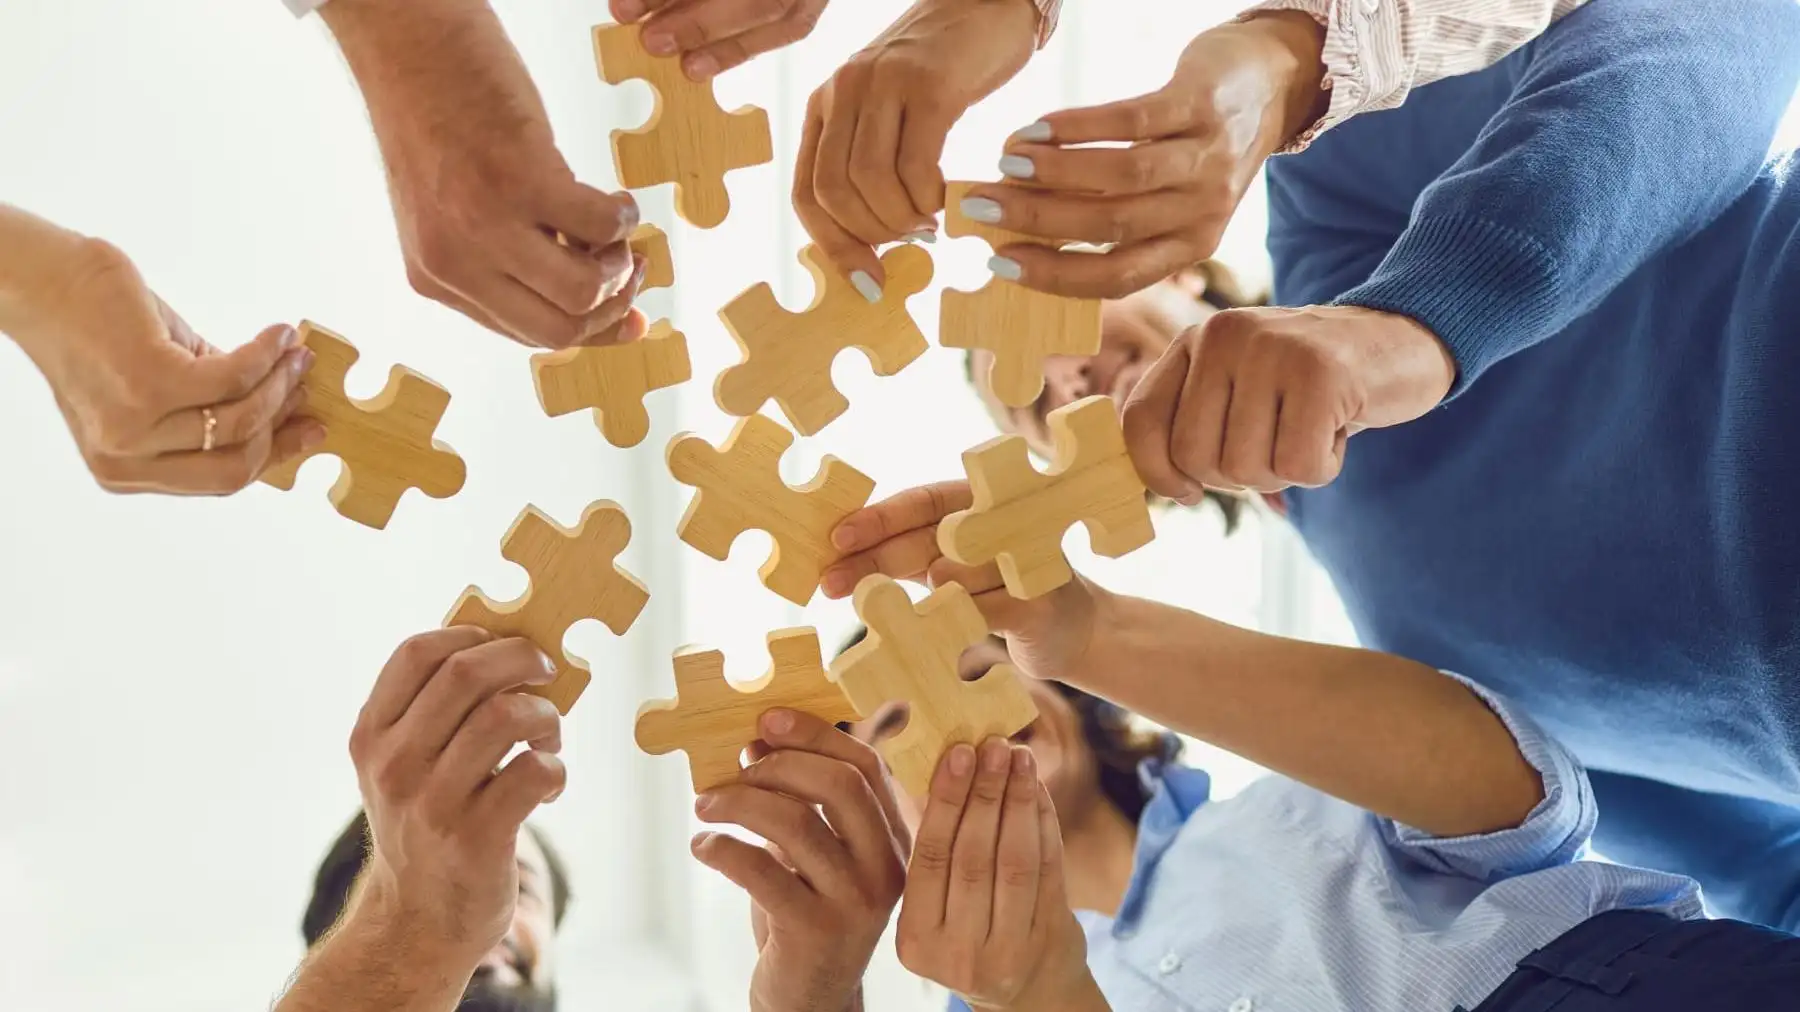 Image of people joining parts of a puzzle.